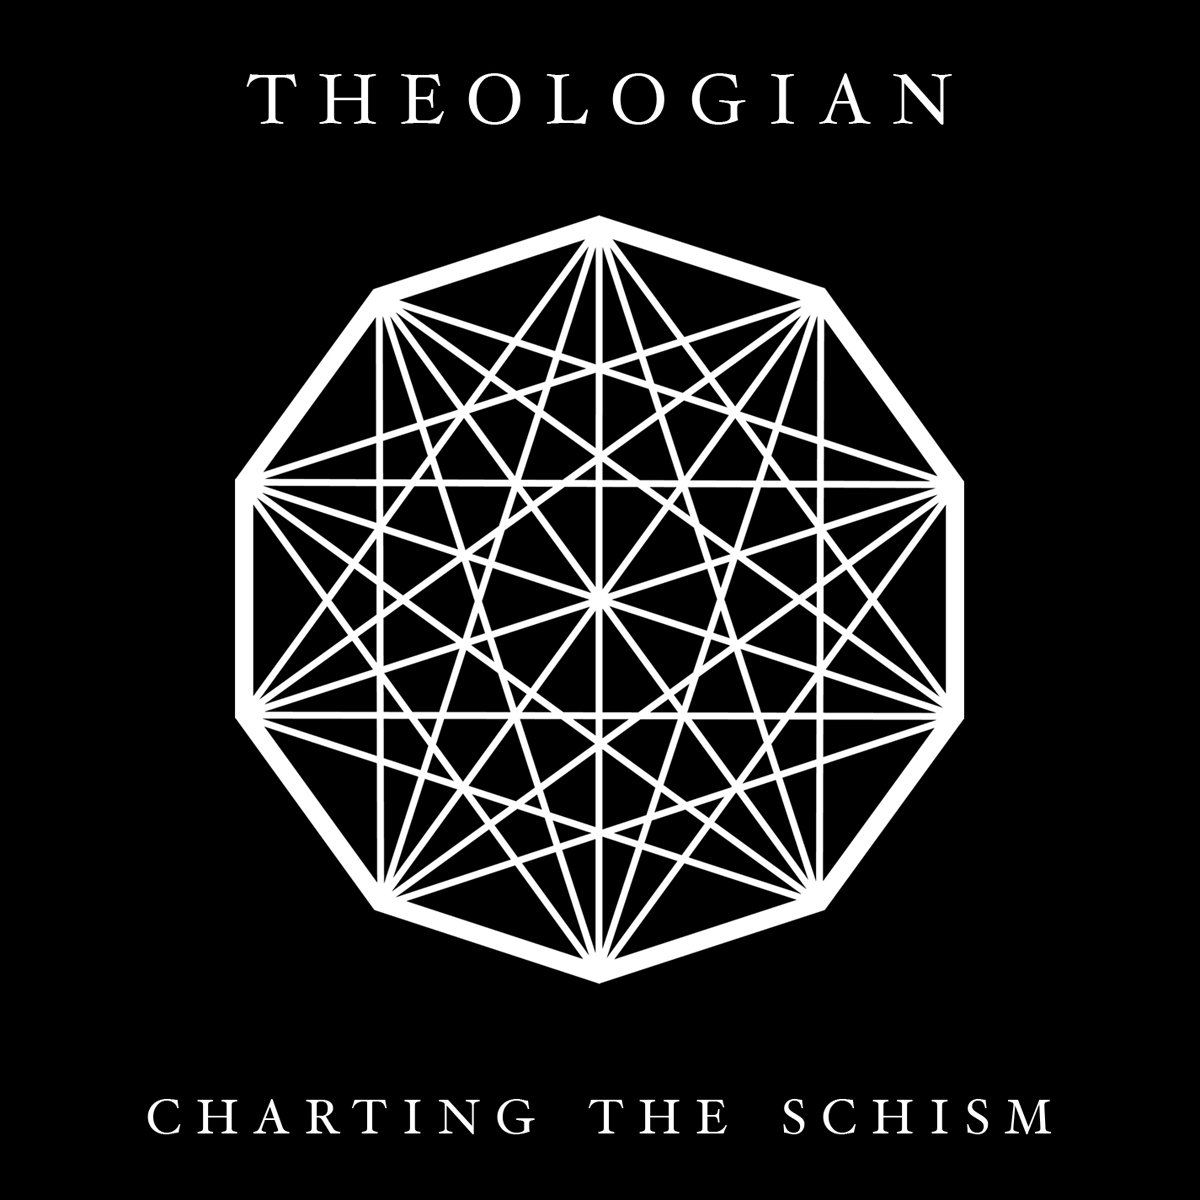 Charting The Schism - THEOLOGIAN